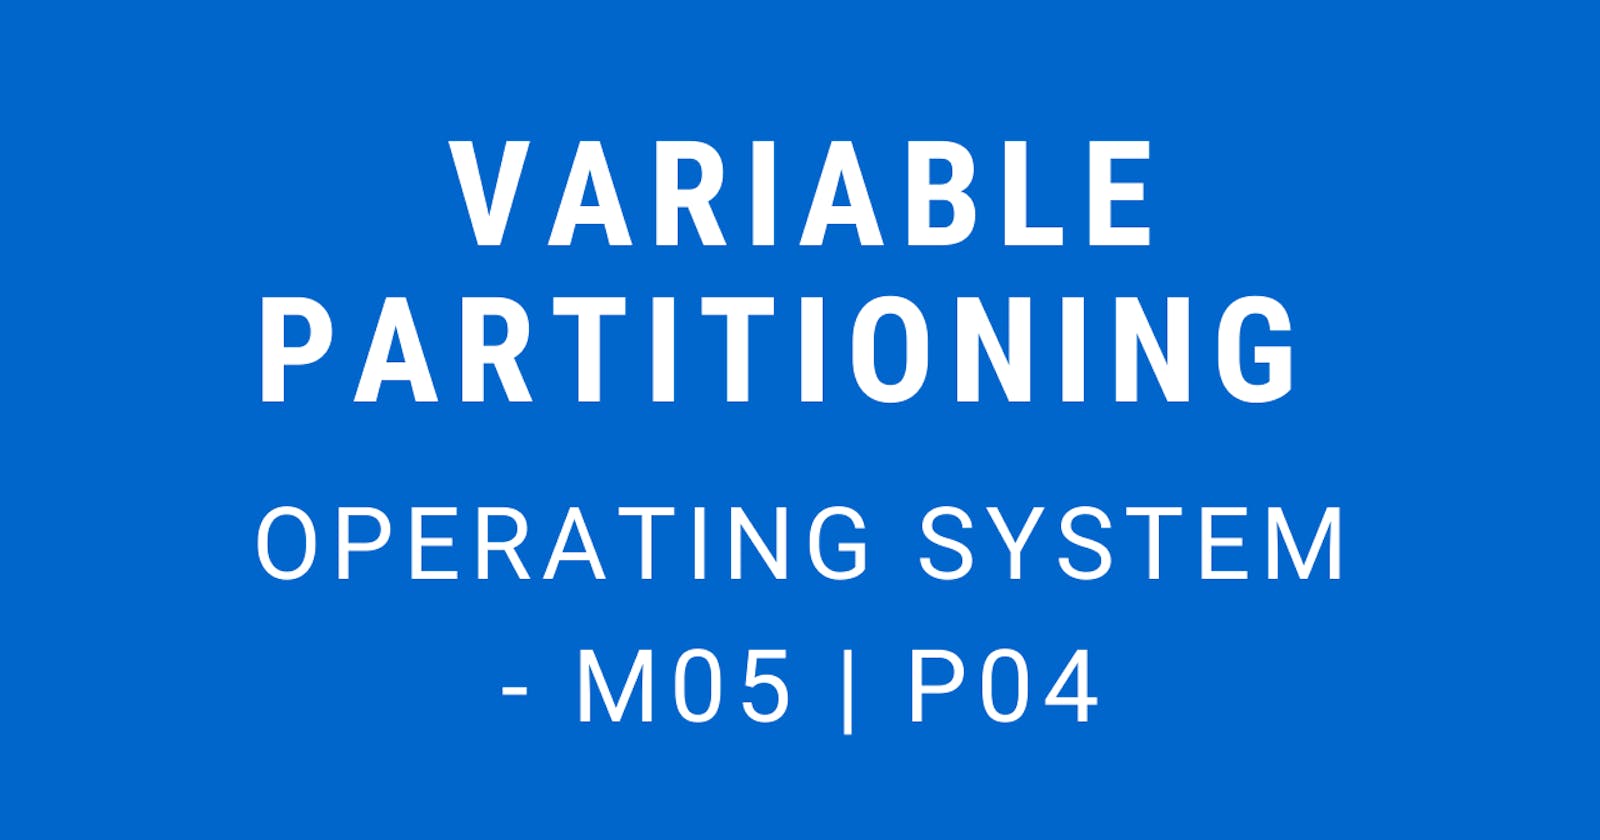 Variable Partitioning | Operating System - M05 P04